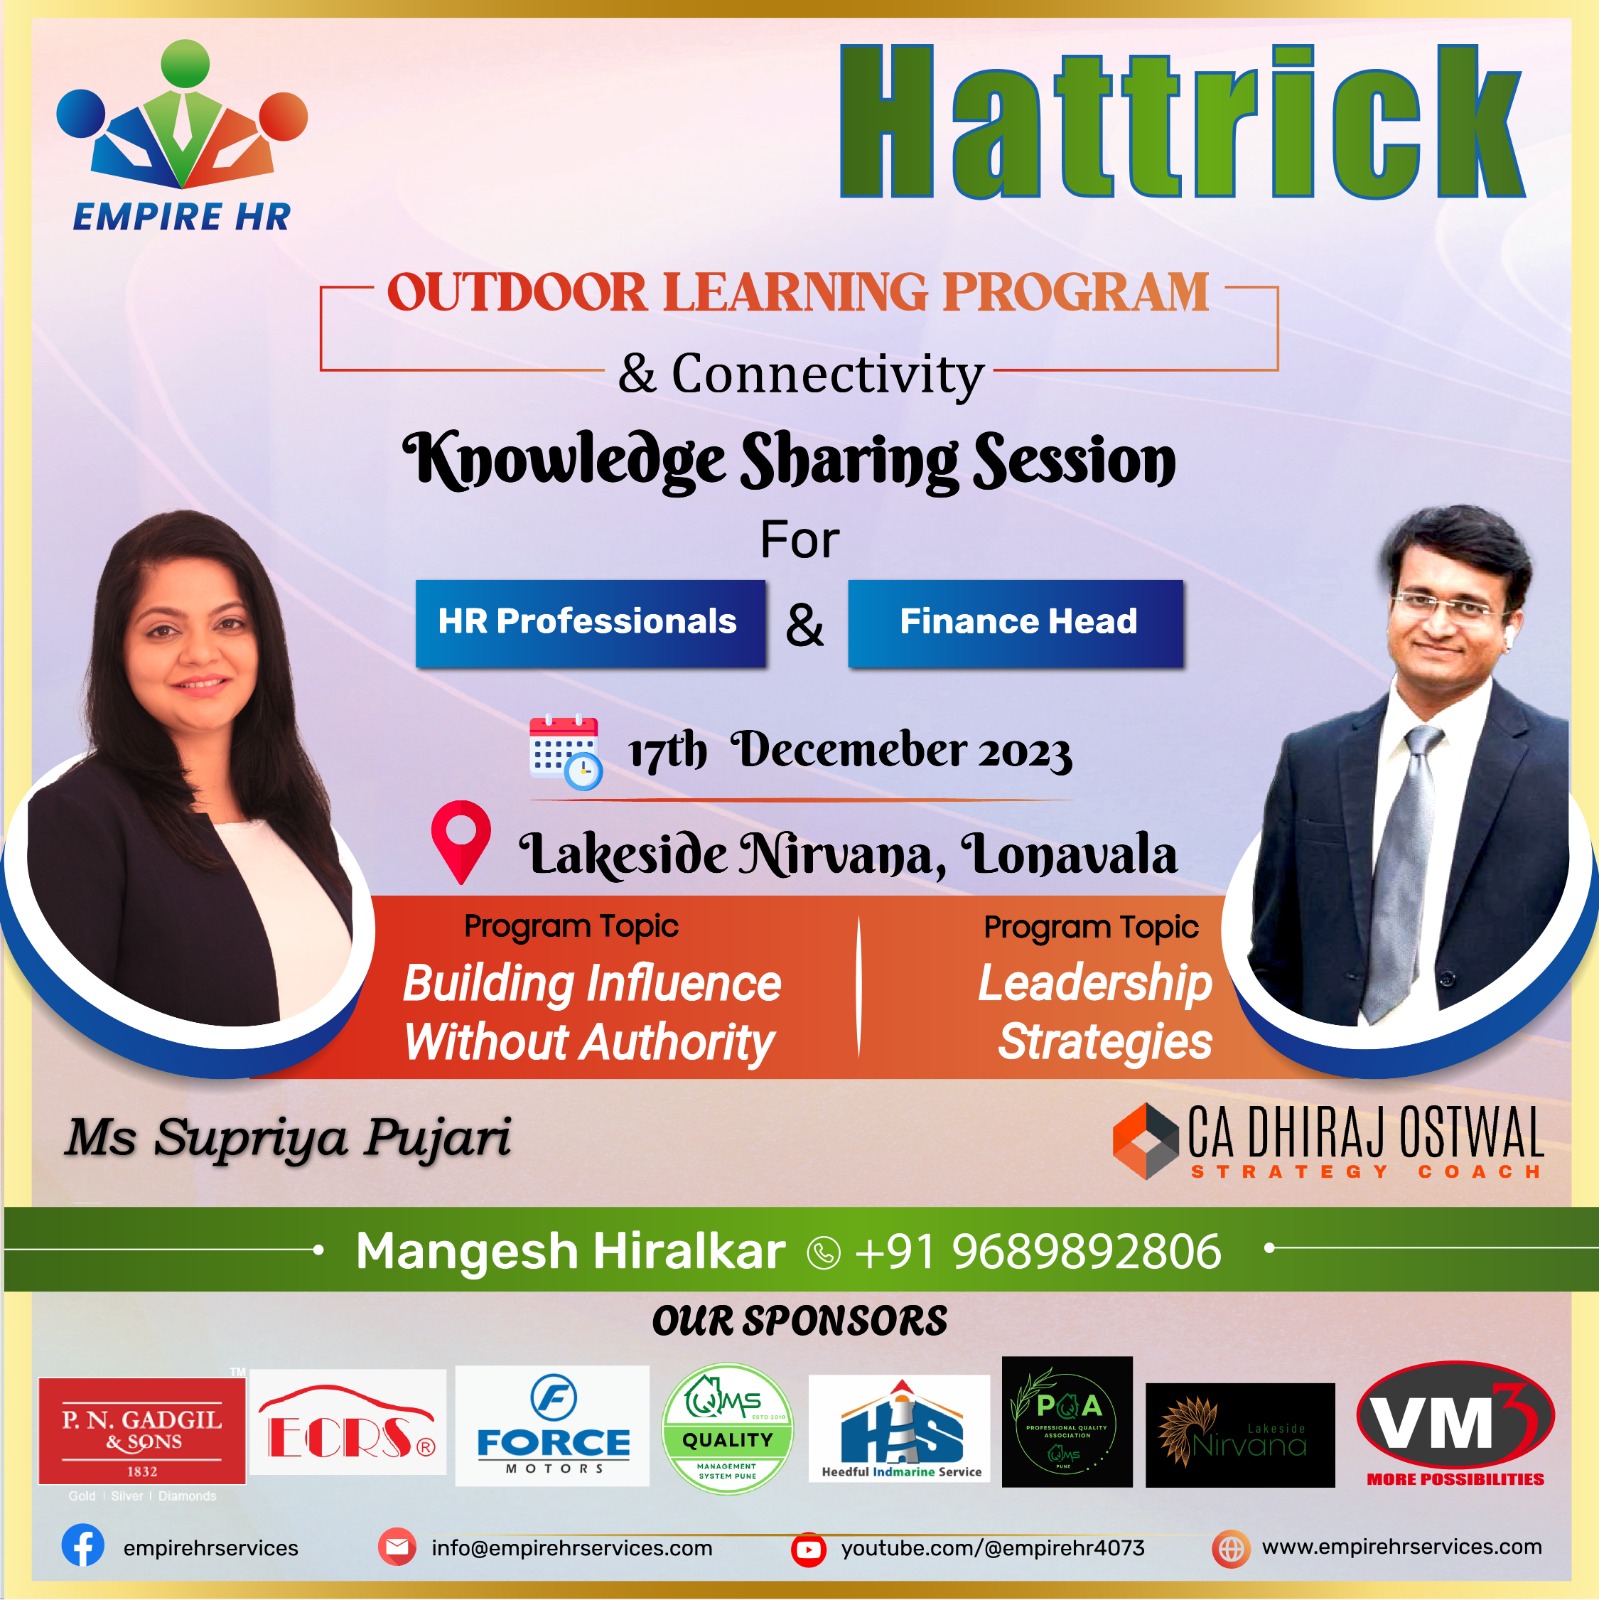 Hattrick: Knowledge Sharing Session